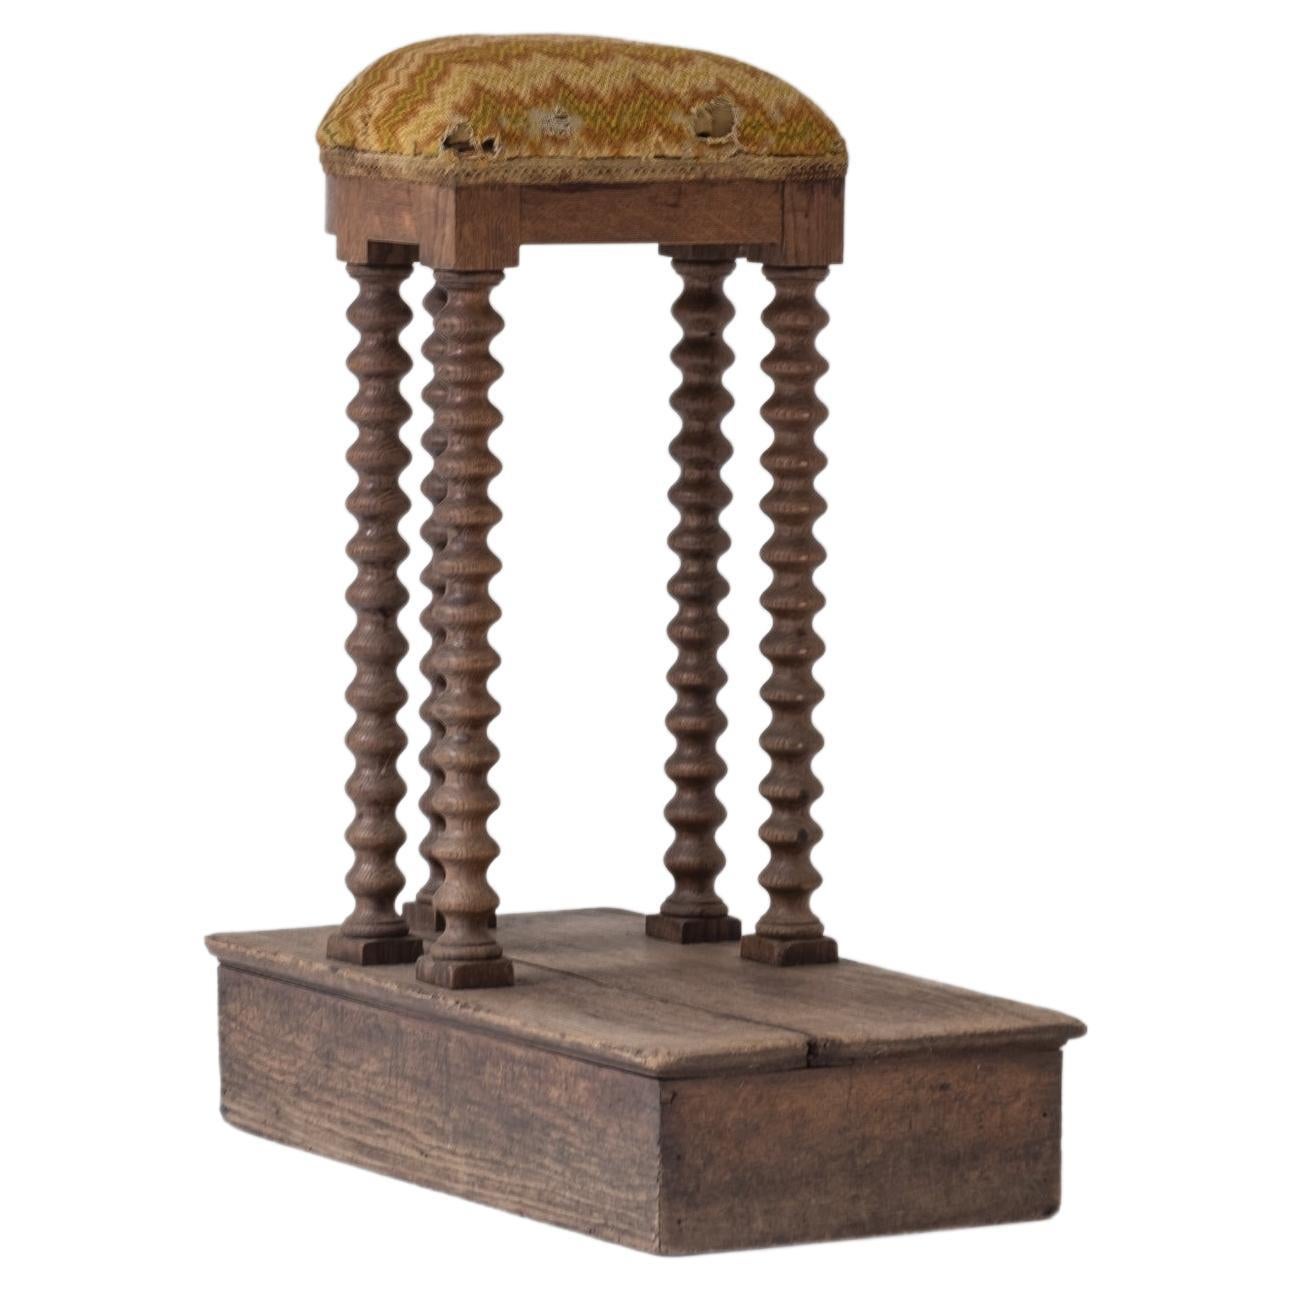 Cantor’s stool in oak wood, from the beginning of the 18th century, France For Sale